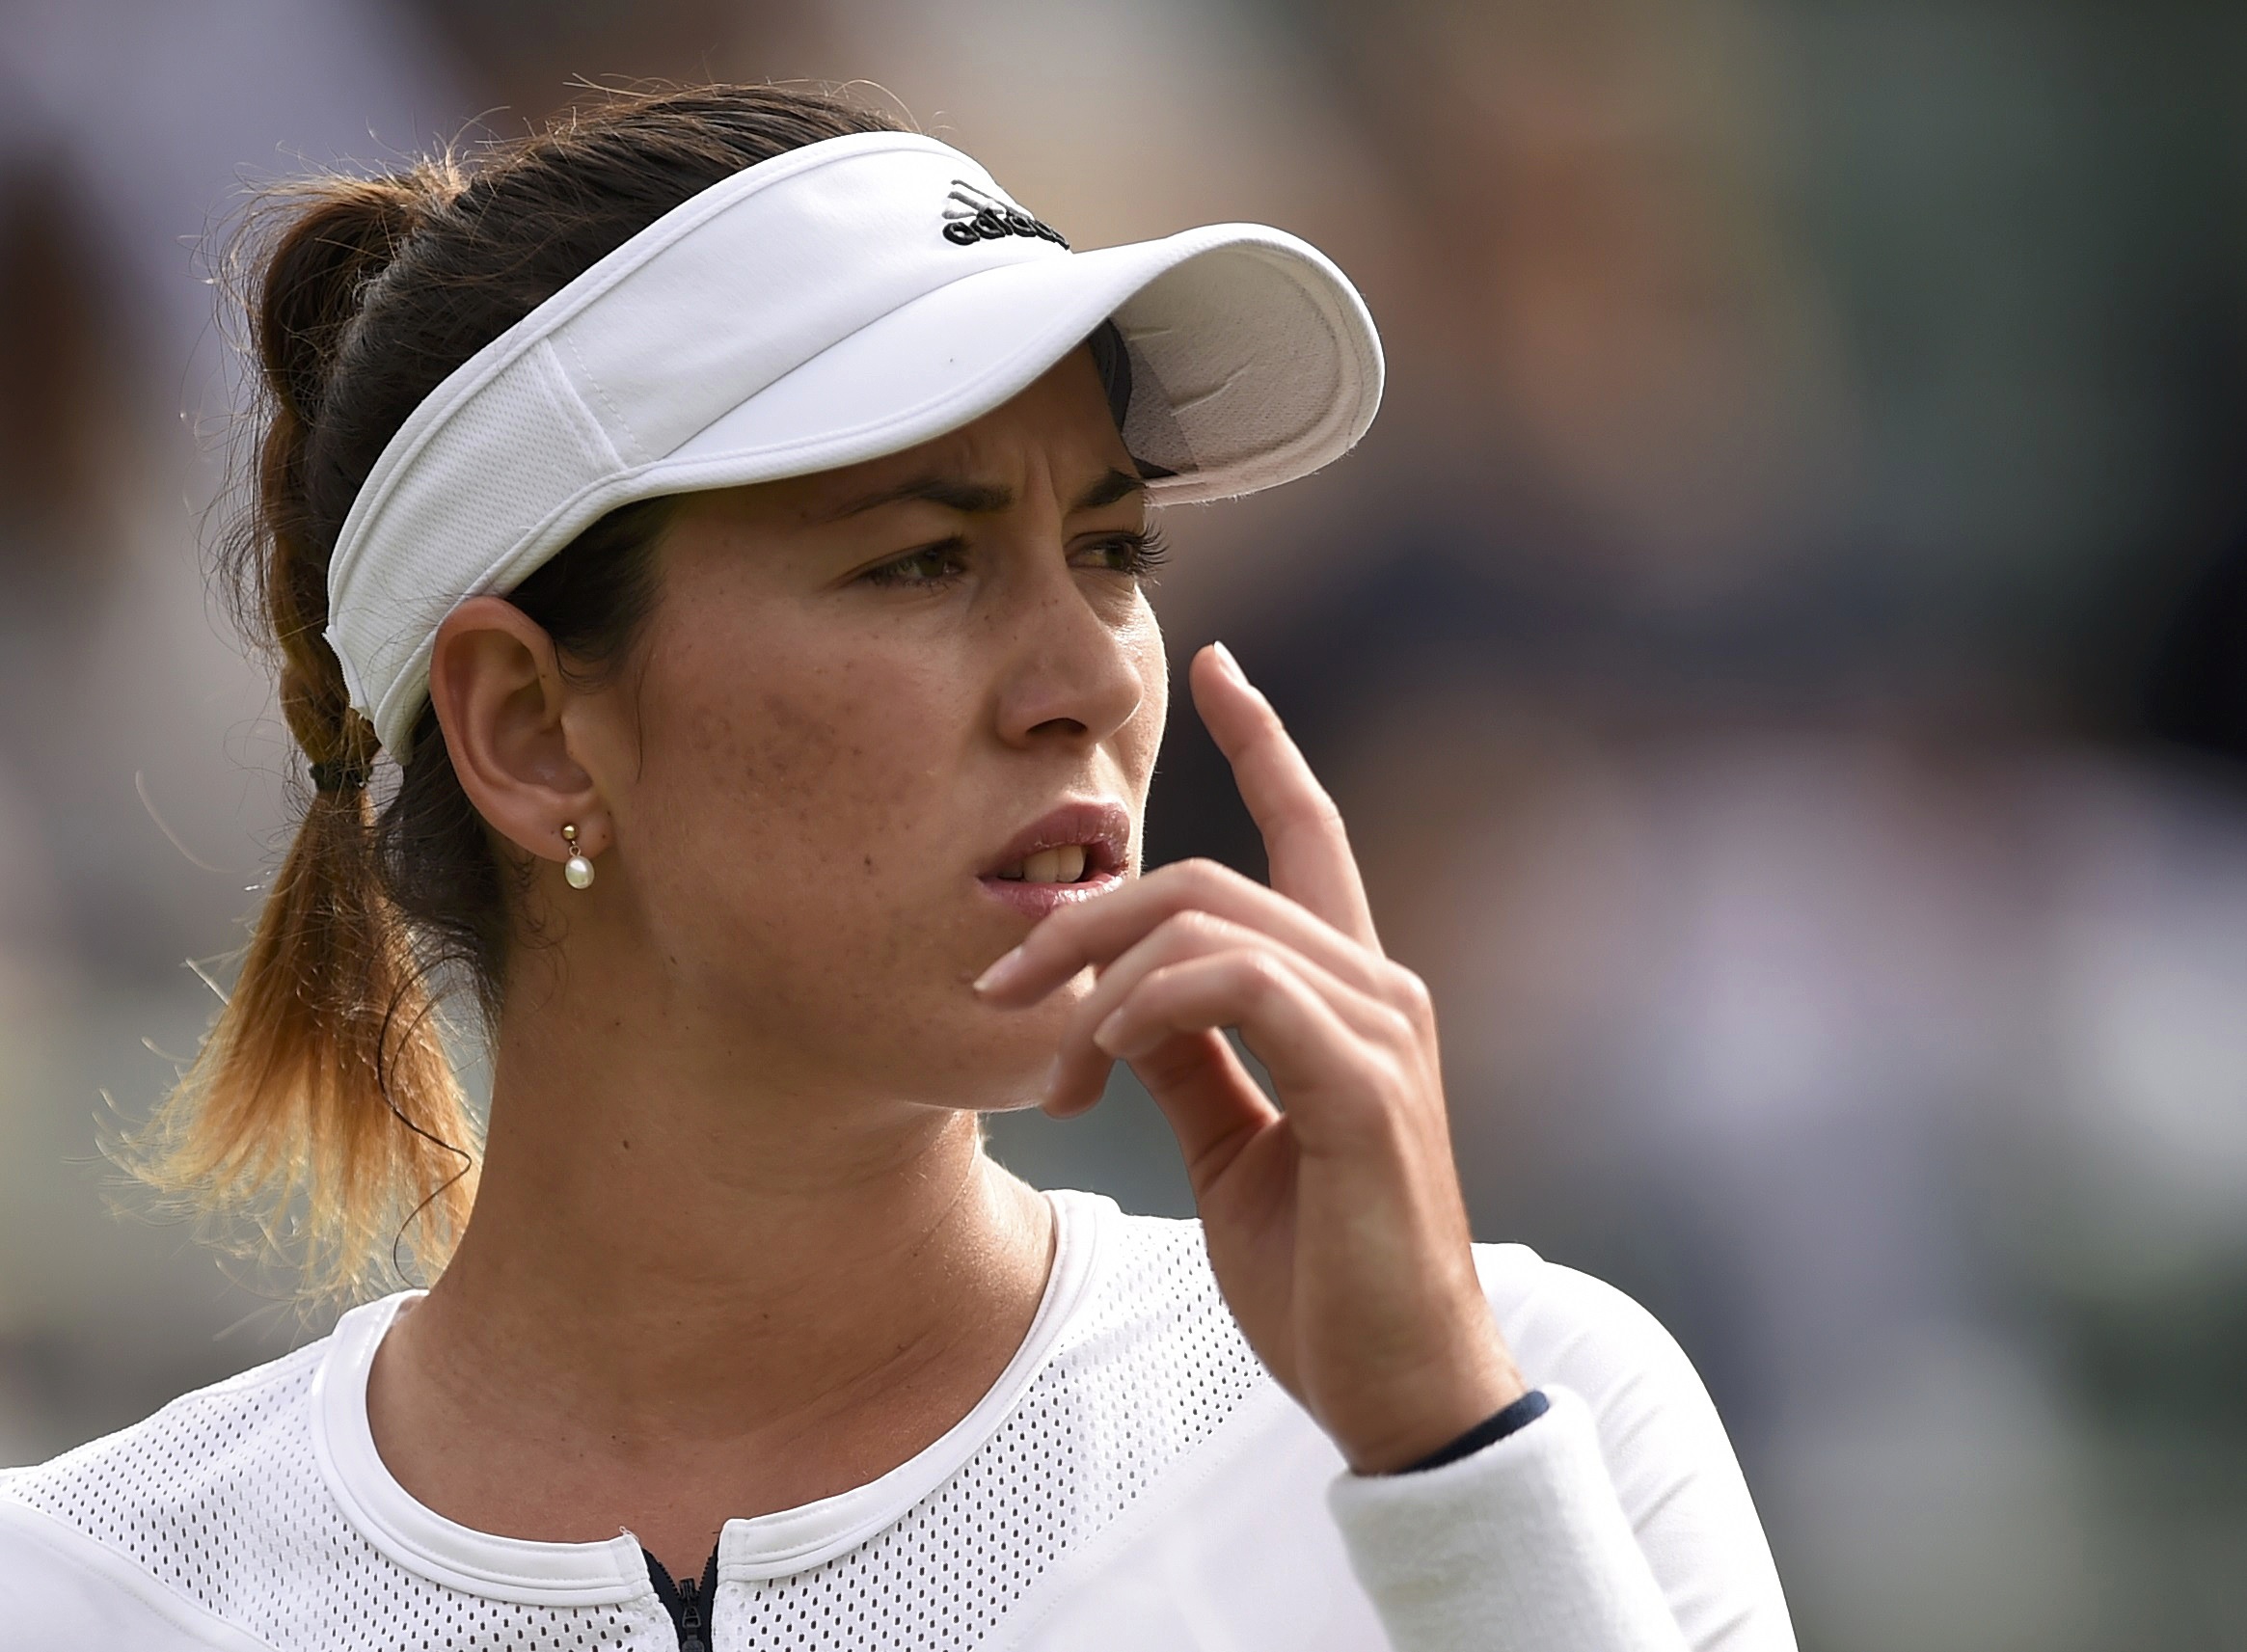 Tennis: Muguruza stunned by qualifier, draw opens up for Serena